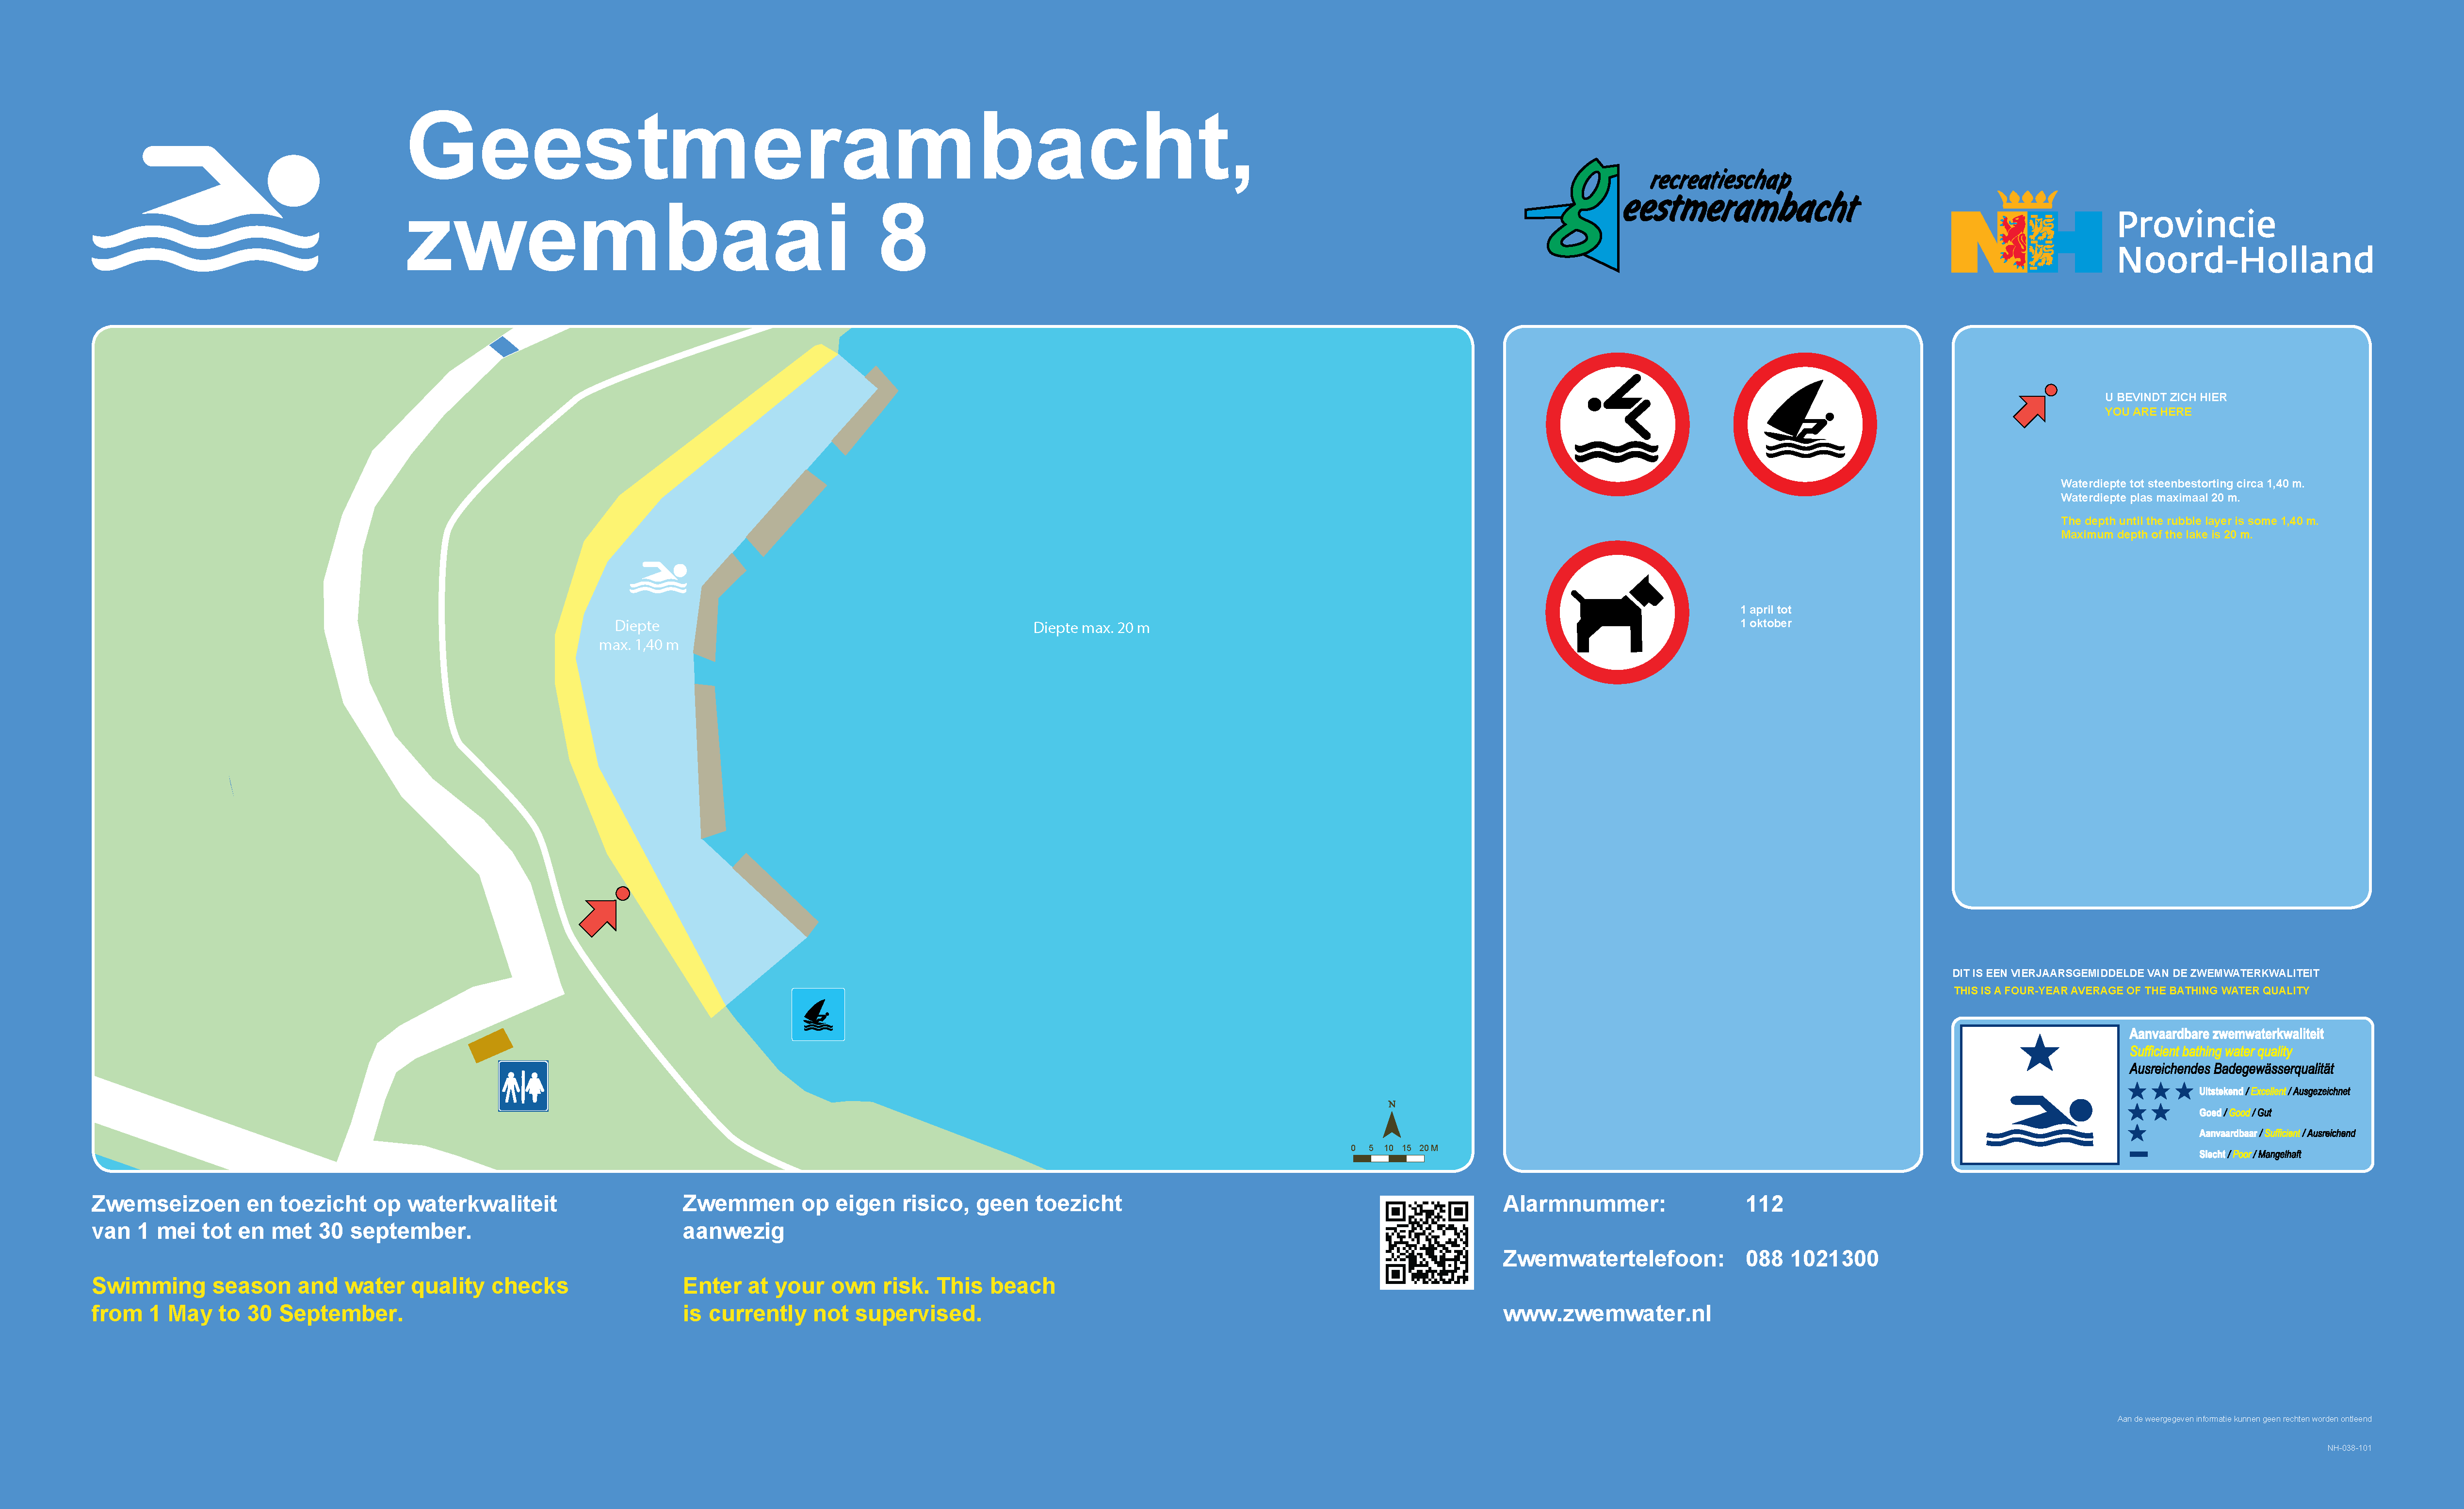 The information board at the swimming location Geestmerambacht, Zwembaai 8